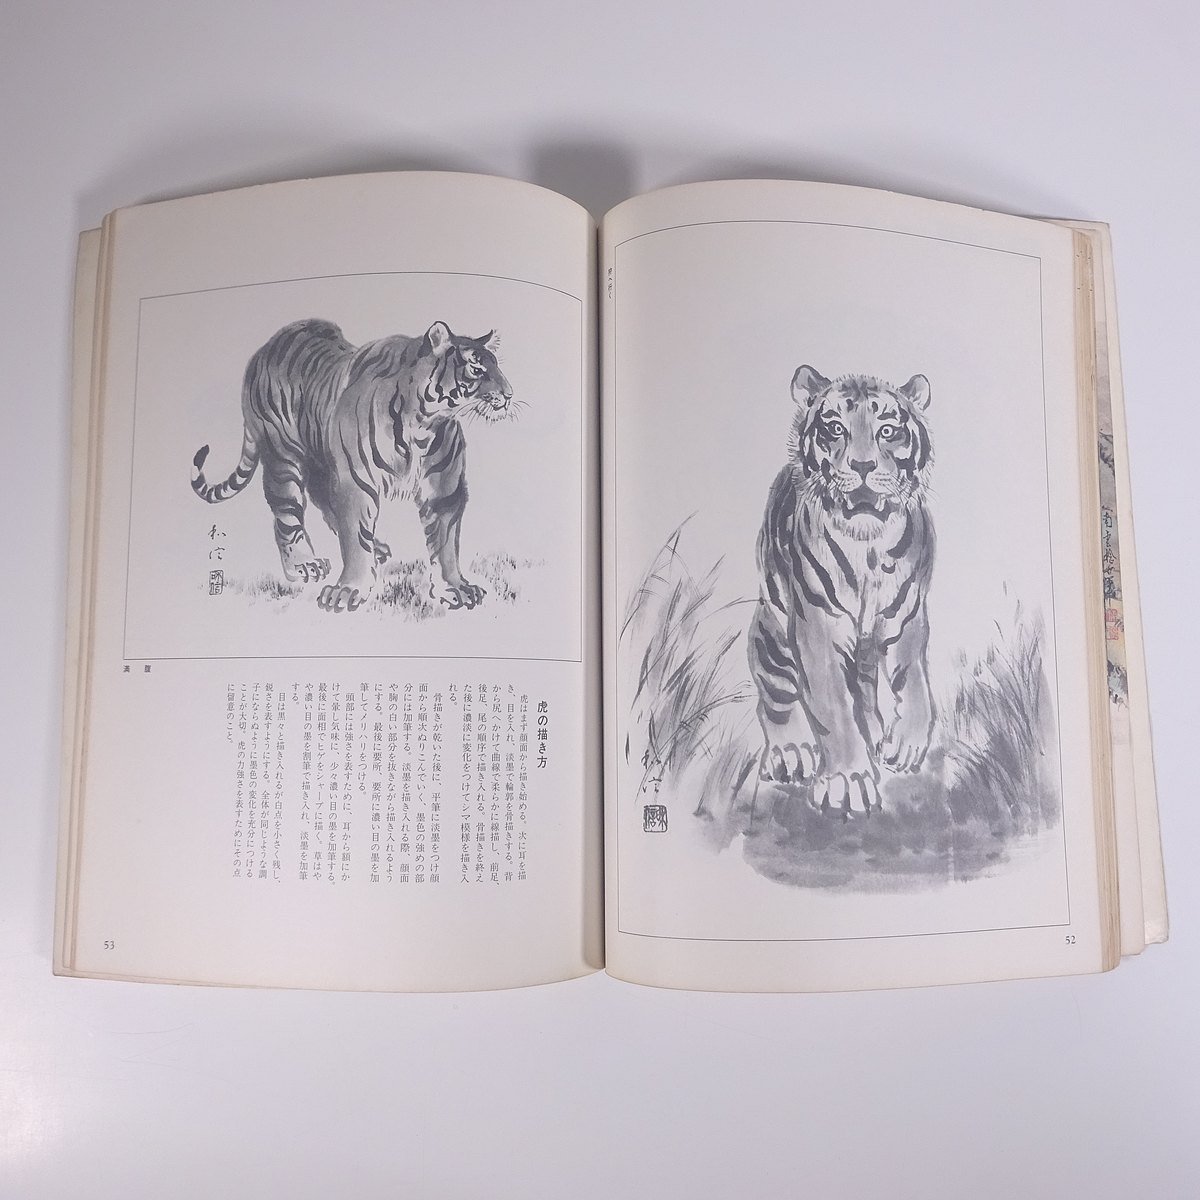 .... season ... separate volume day . publish company 1985 large this drawing version llustrated book art fine art picture book of paintings in print work compilation Japanese picture water ink picture ... tiger 